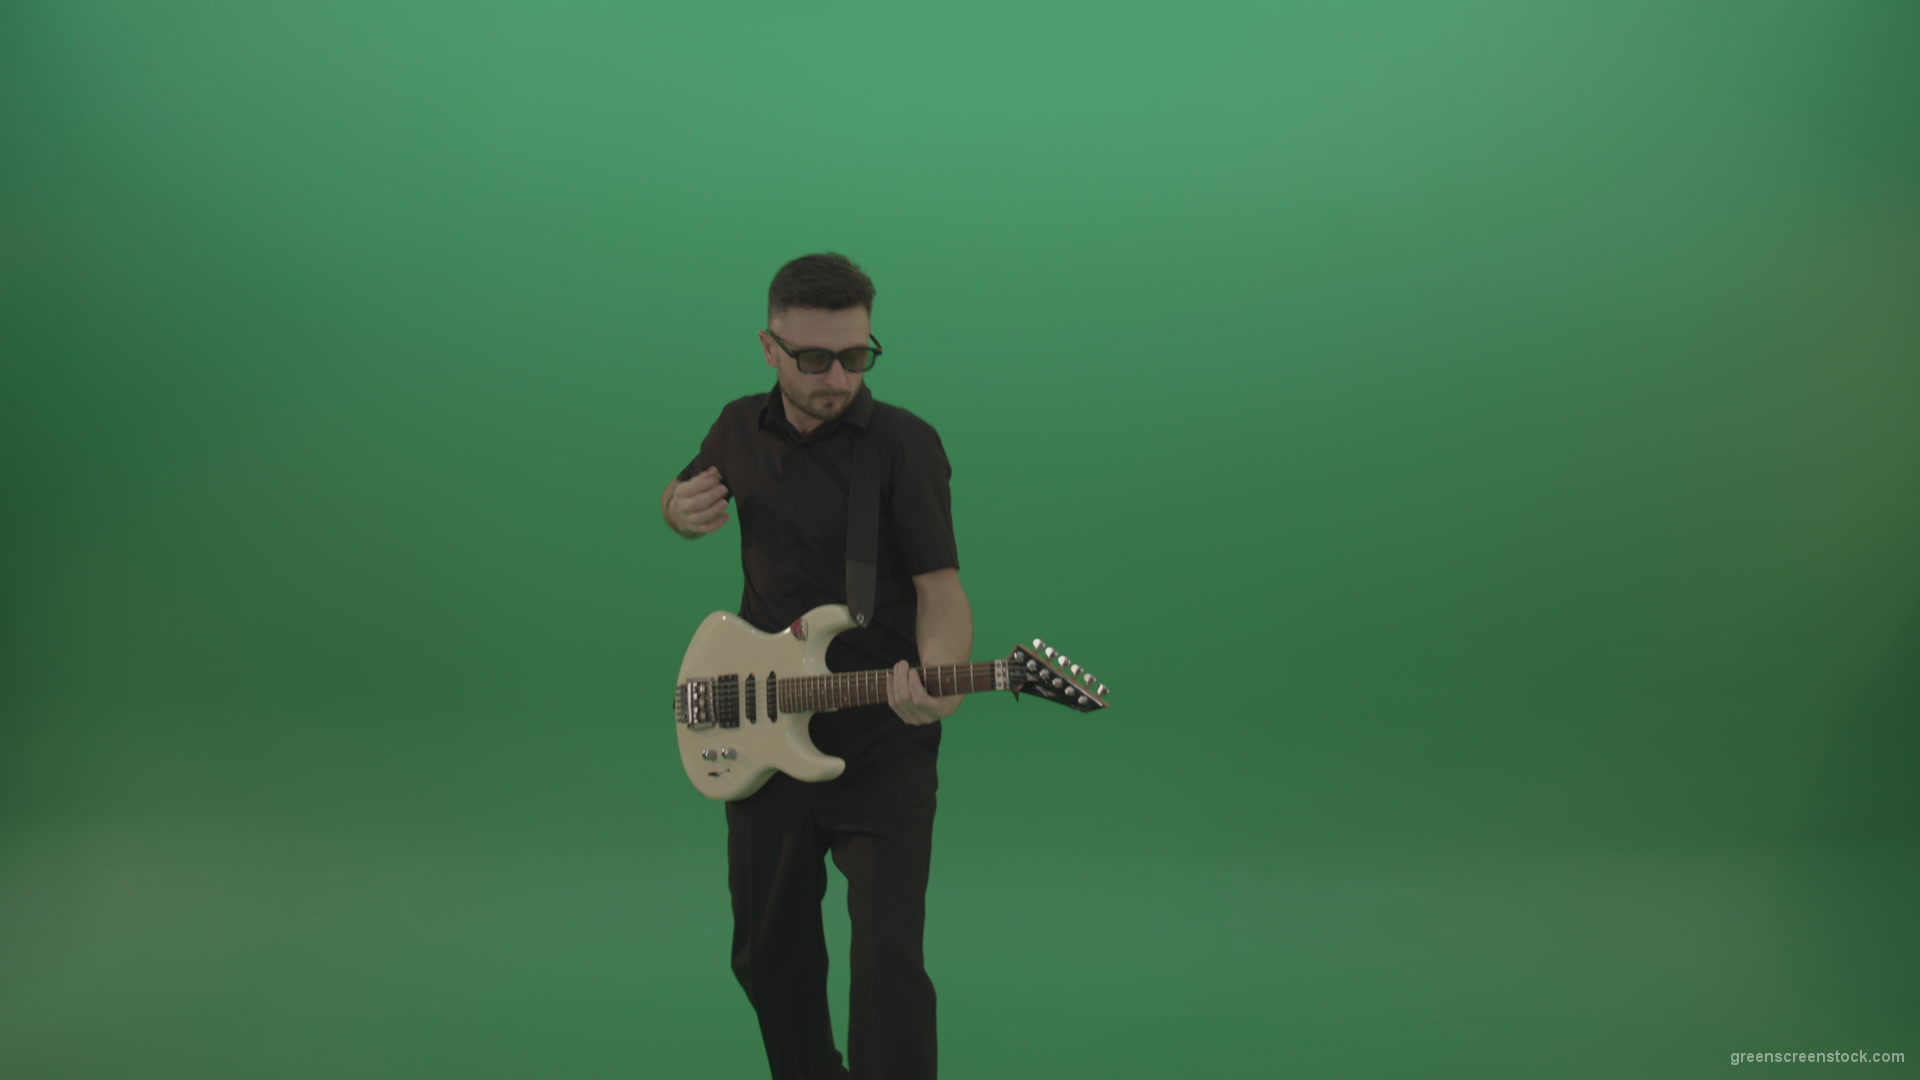 Man-in-black-costume-virtuoso-play-white-electro-rythm-guitar-isolated-on-green-screen_009 Green Screen Stock